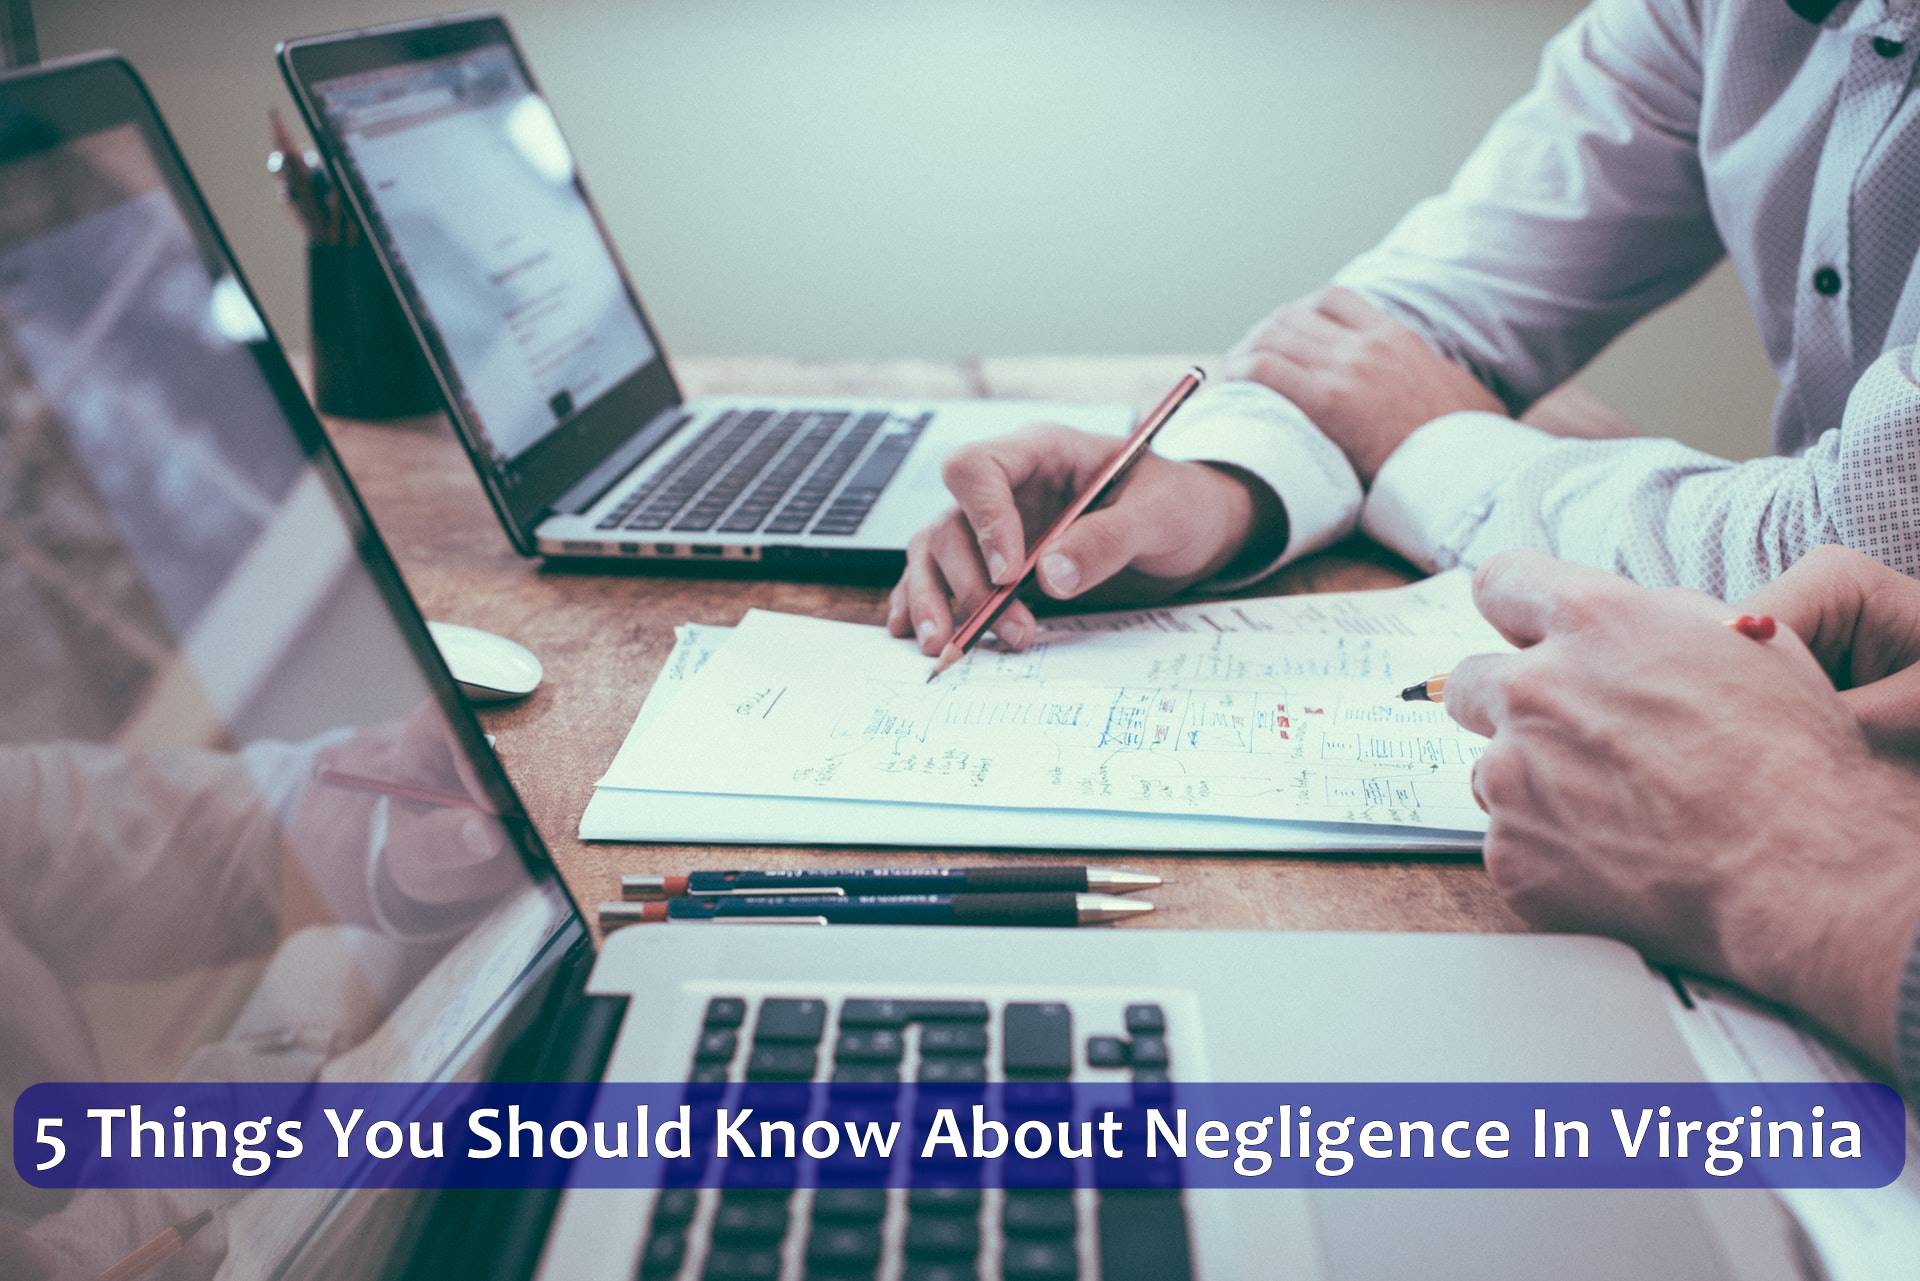 5 Things You Should Know About Negligence In Virginia